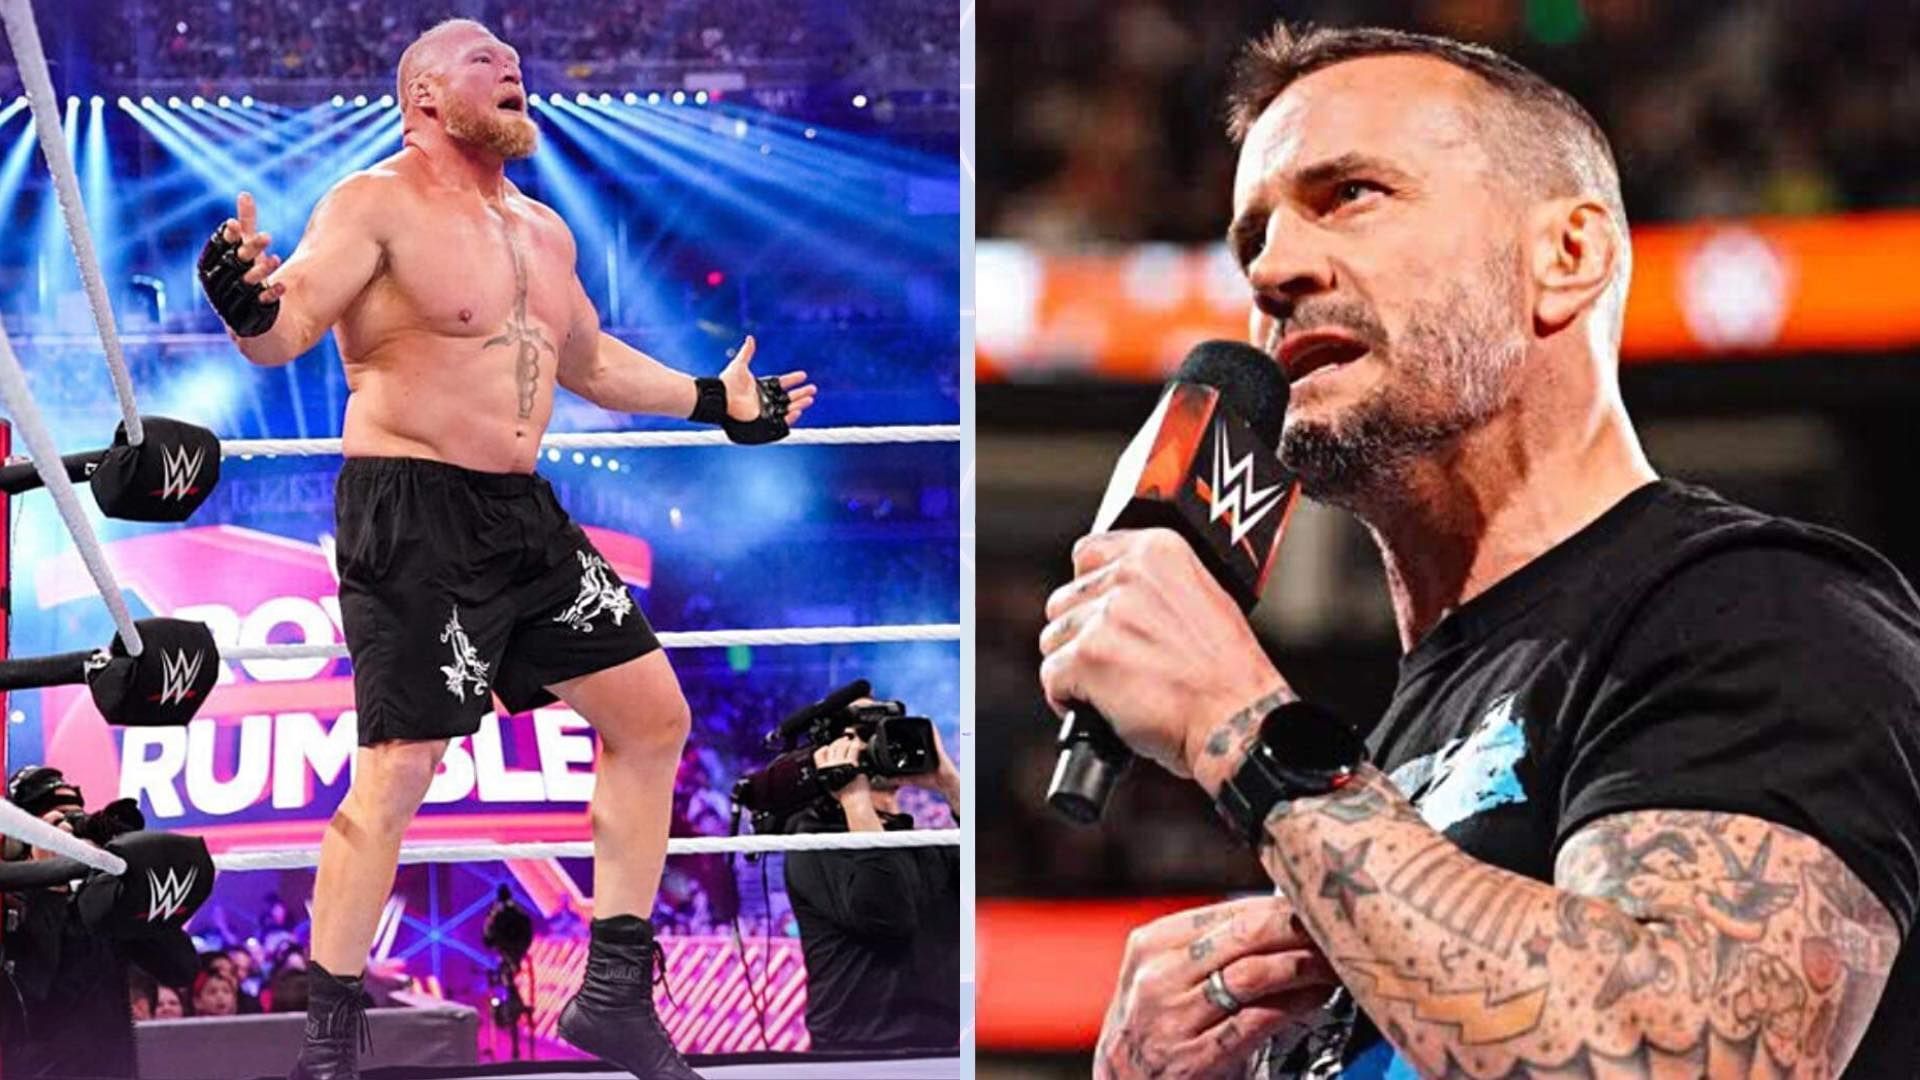 CM Punk and Brock Lesnar missing WrestleMania could mean troubled times